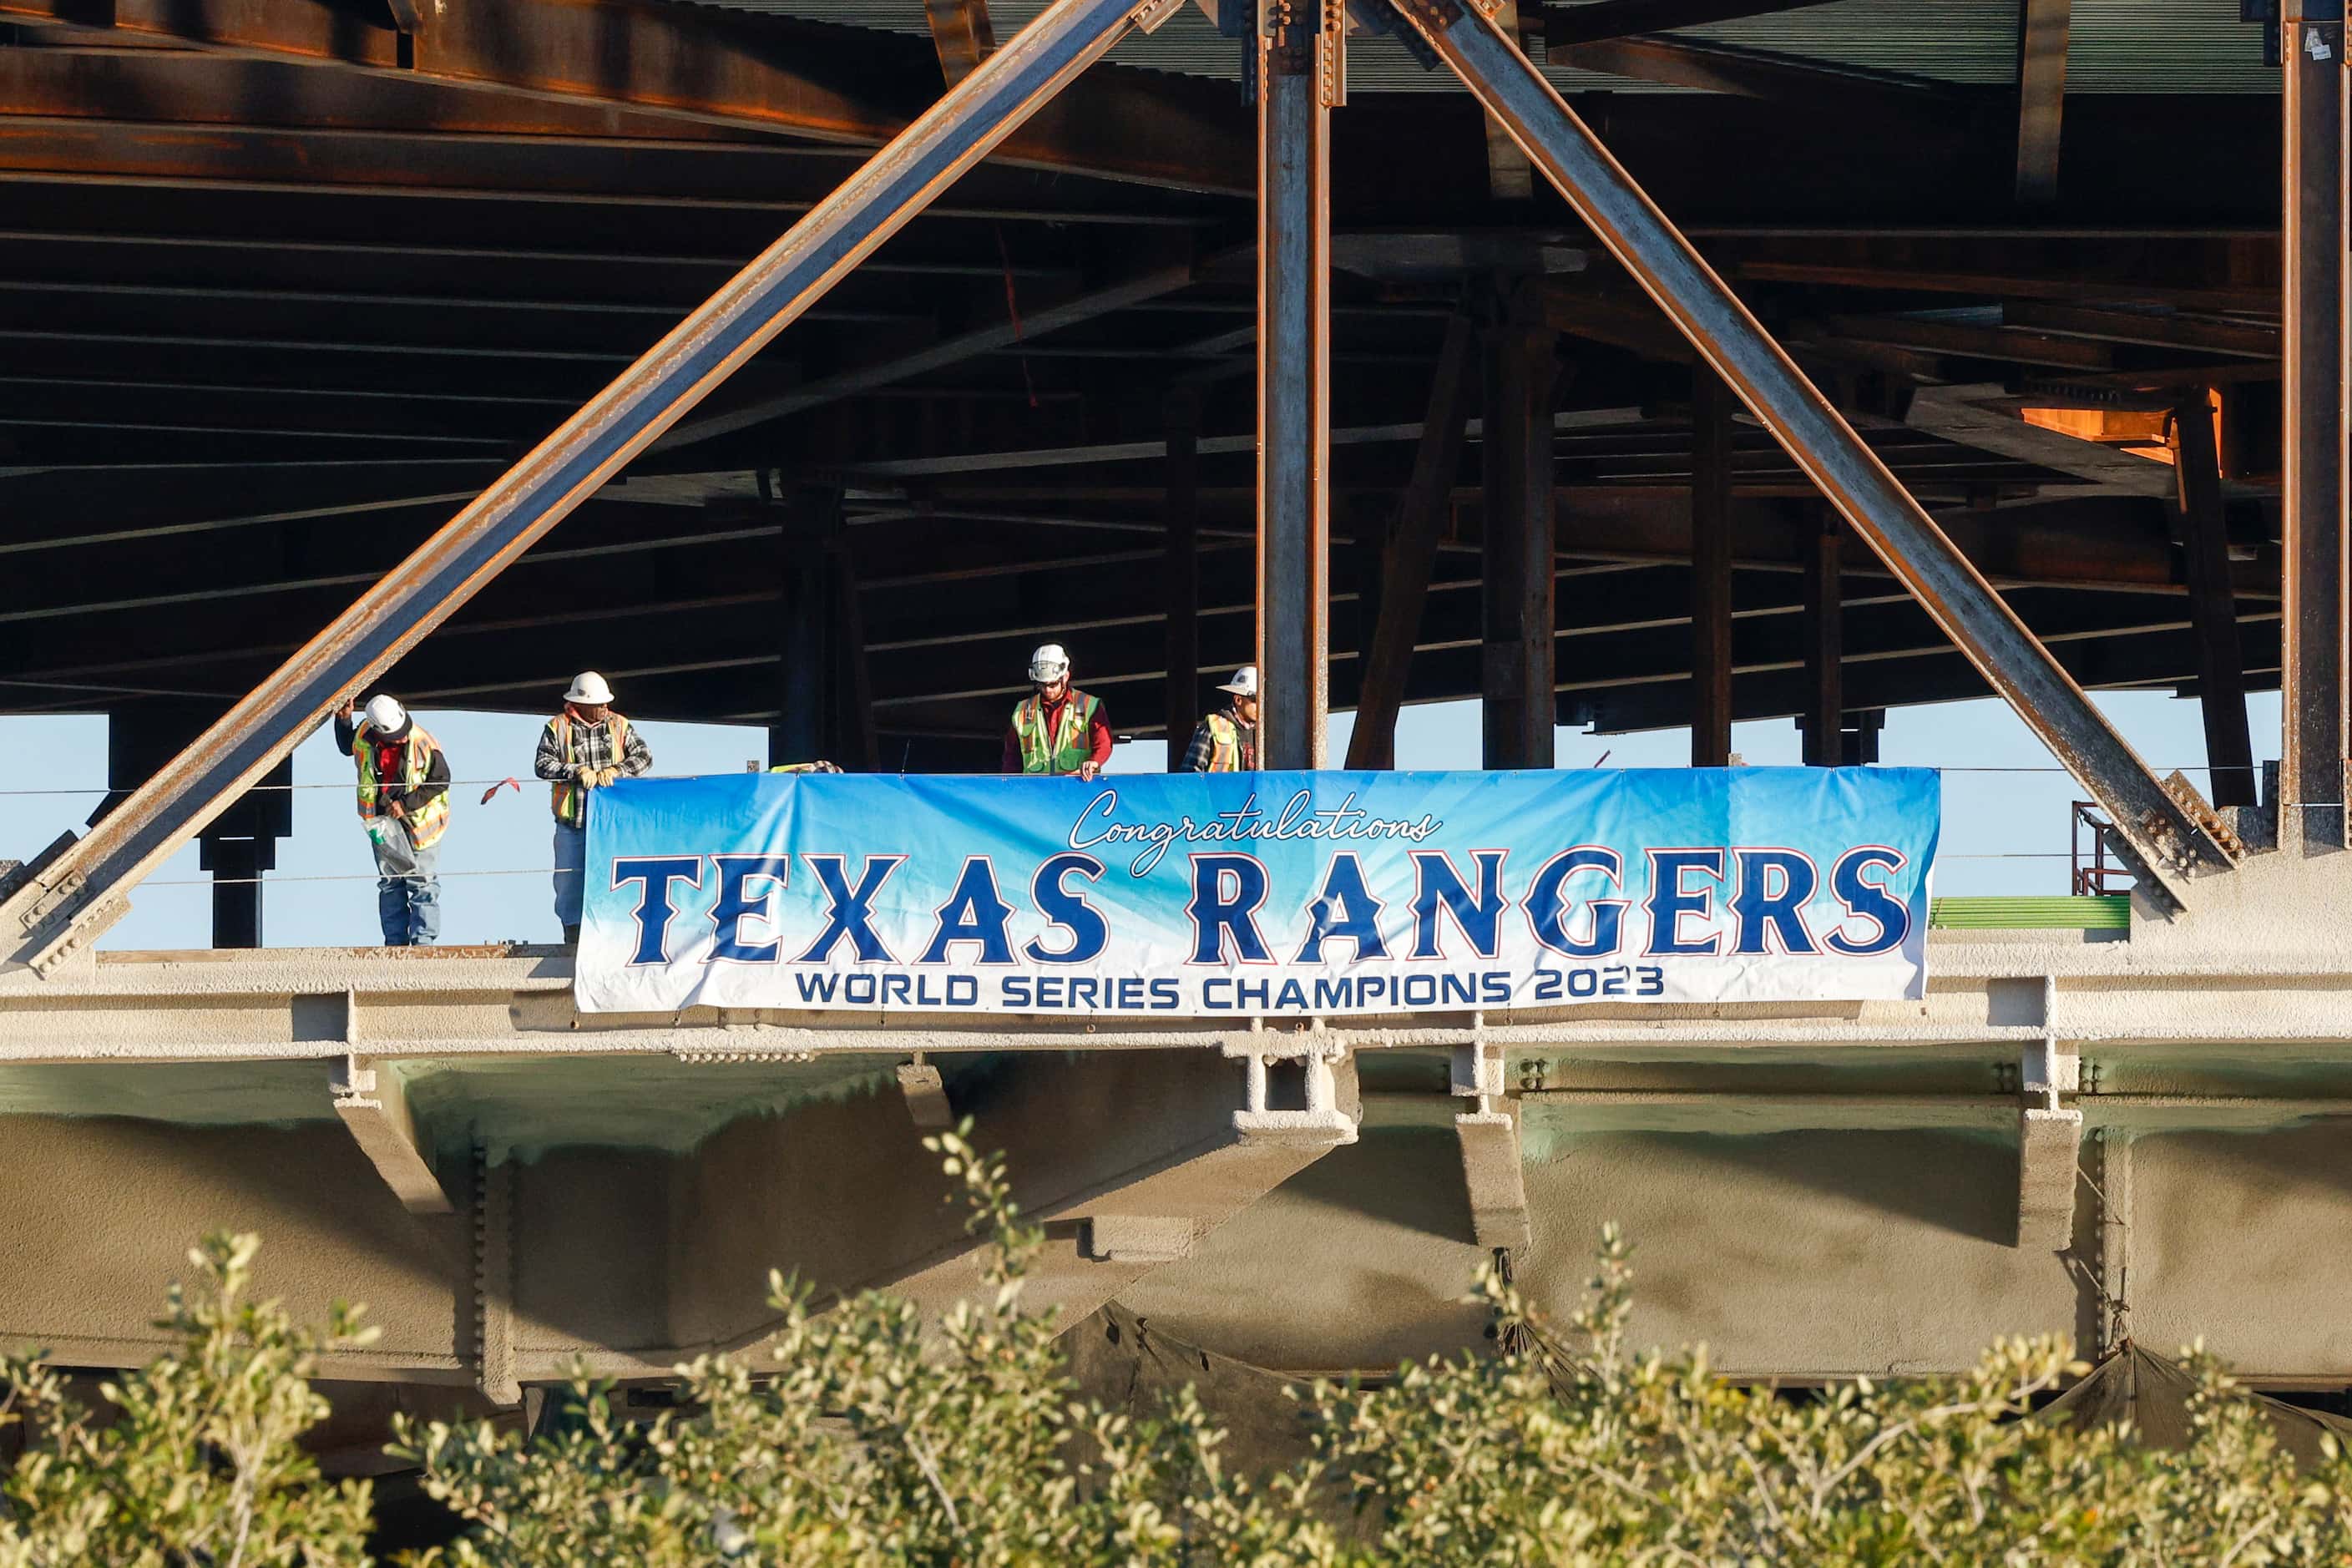 Construction workers at the Medal of Honor museum unveil a banner congratulating the Texas...